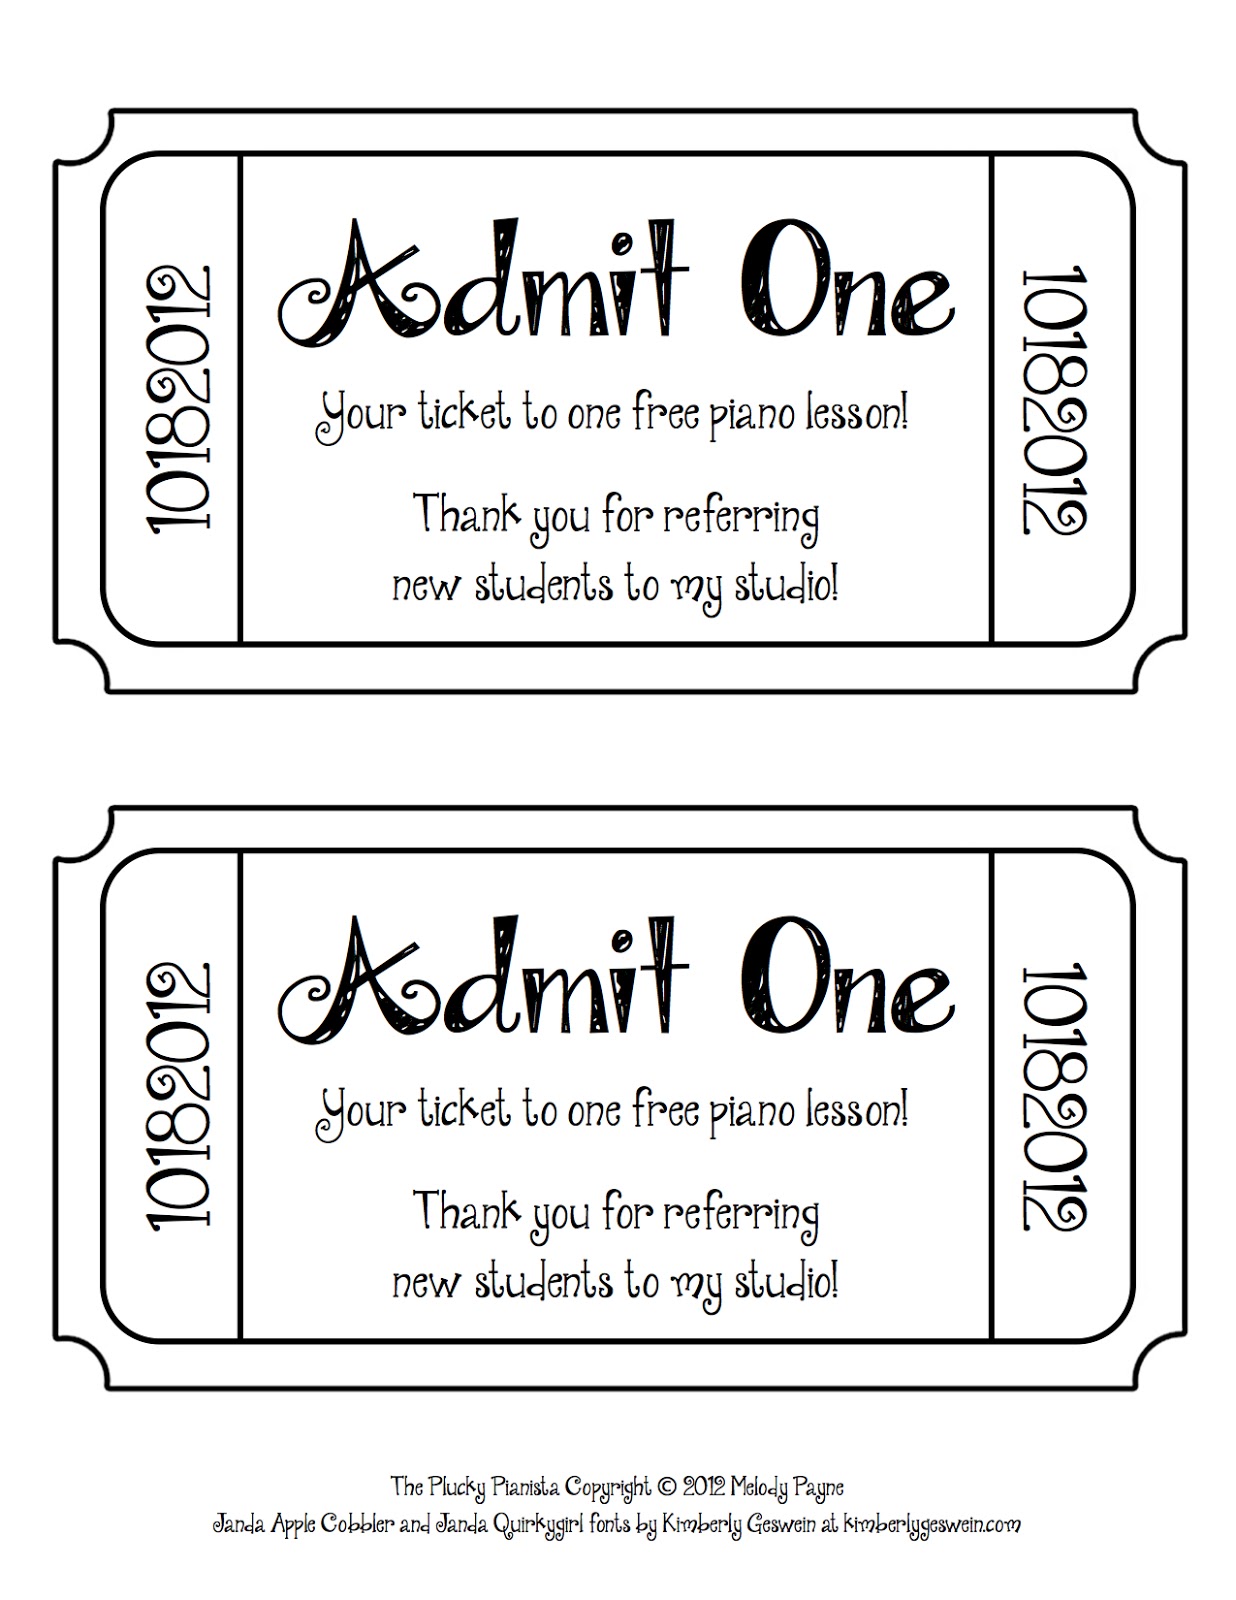 Free Ticket Template, Download Free Ticket Template png images In Blank Admission Ticket Template